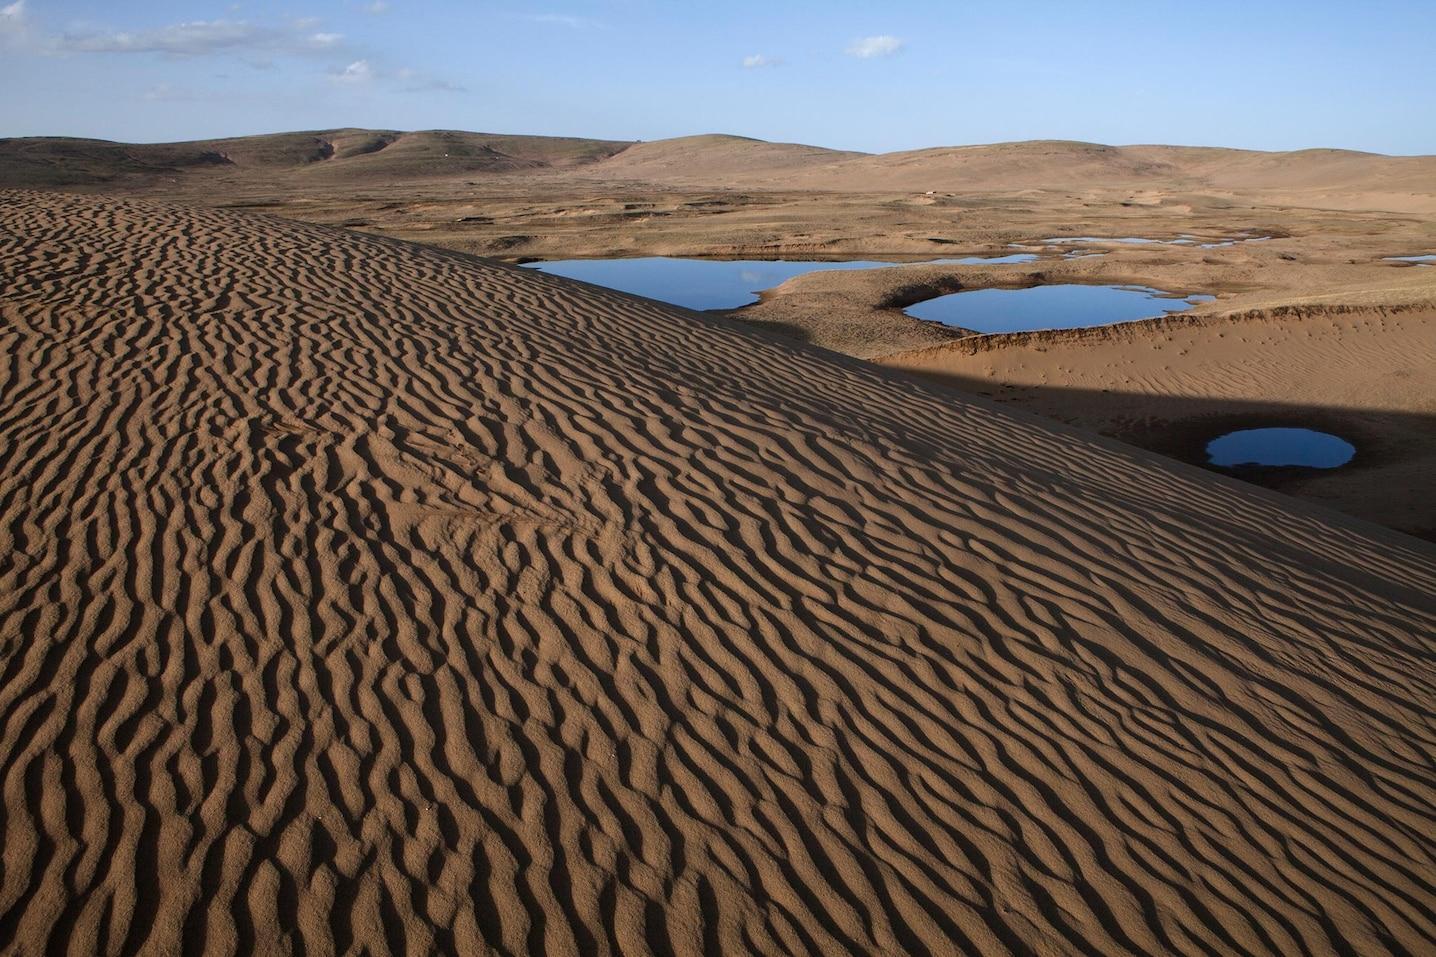 Desertification facts and information